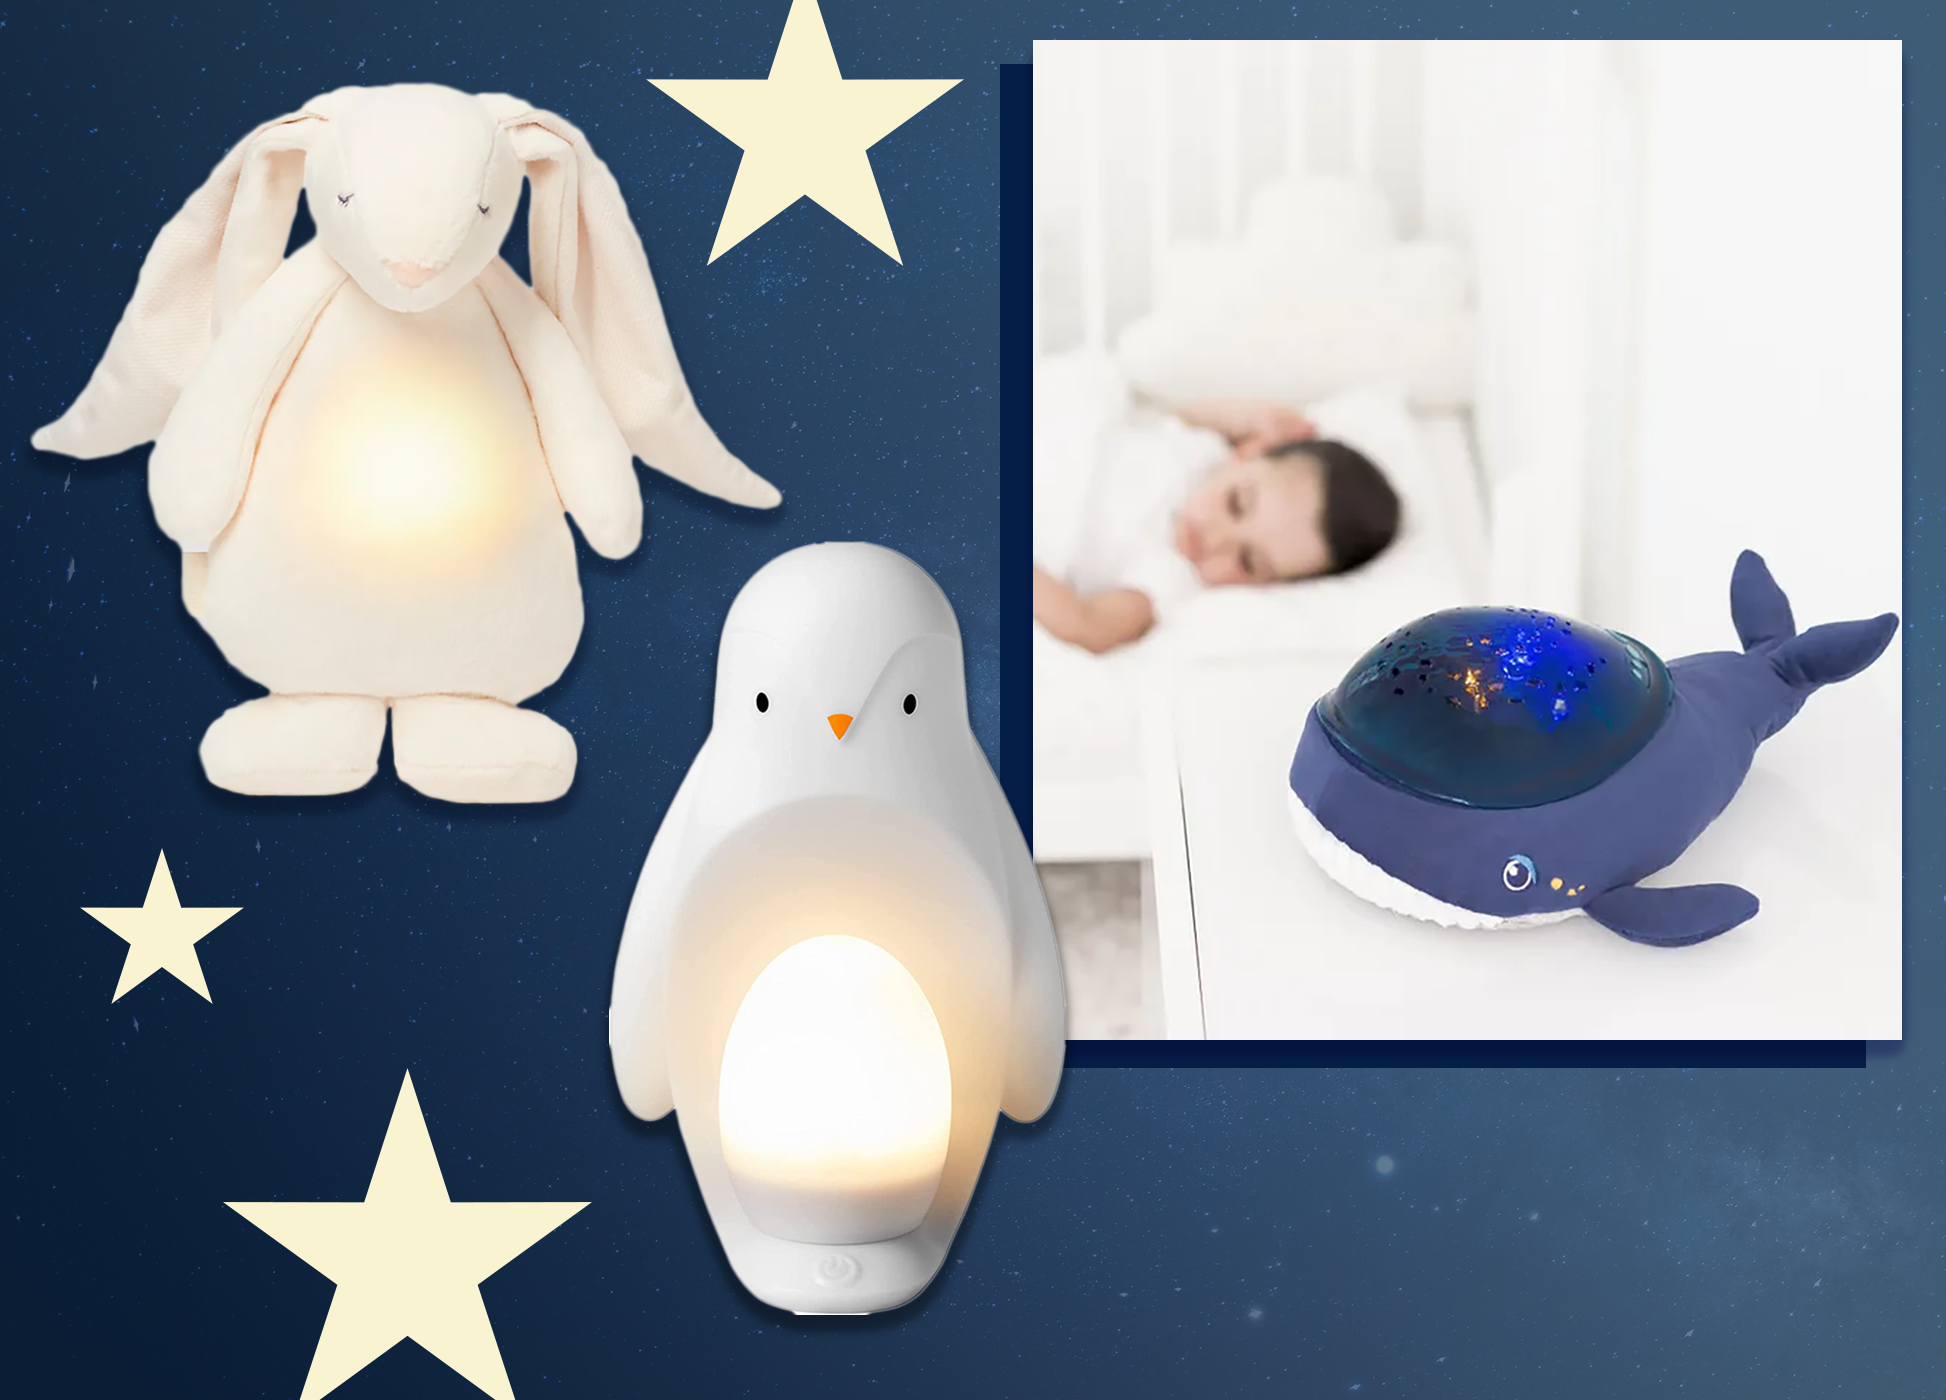 Egg Light Glow Lamp For A Soothing Night - Inspire Uplift